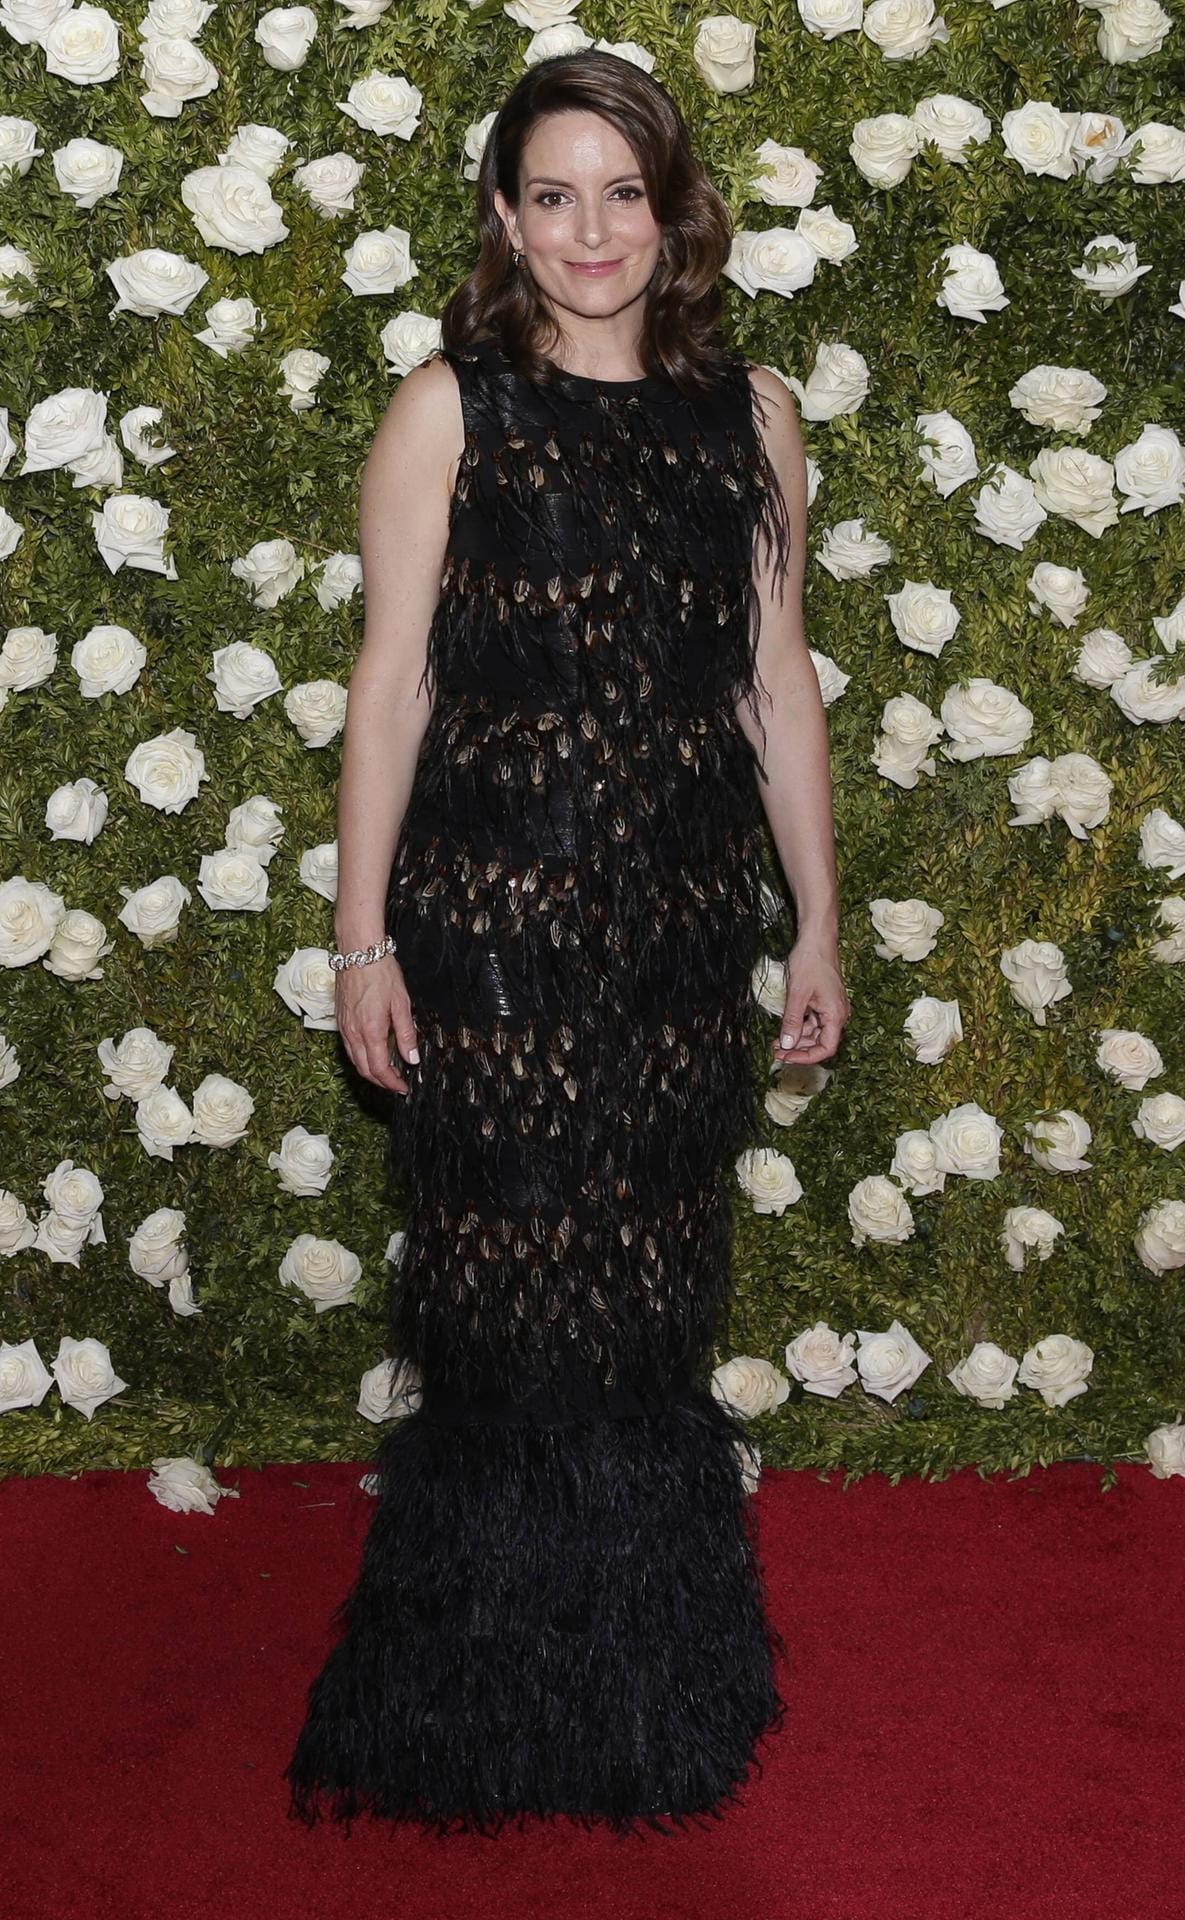 Tina Fey arrives on the red carpet at the 71st Annual Tony Awards at Radio City Music Hall on June 1